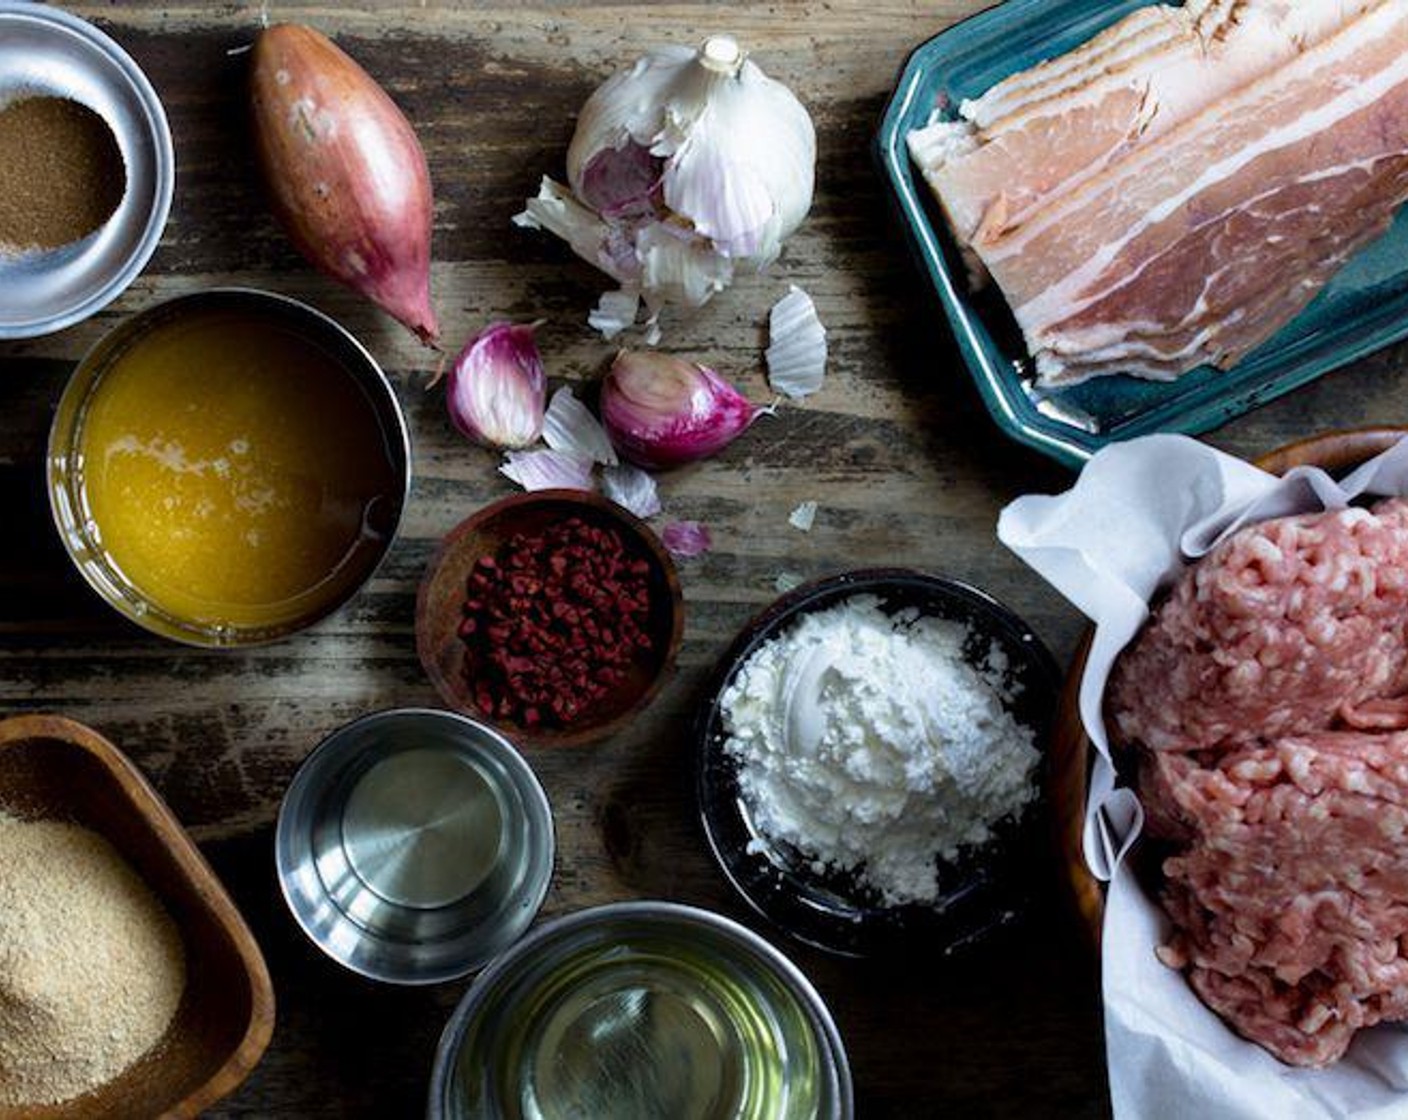 step 1 In a food processor, combine the Garlic (3 cloves), Shallot (1), Bacon (3 slices) and blitz until a paste forms. If you don’t have a food processor, you can chop this by hand, but it must be chopped very finely into almost a paste. Set aside for later.